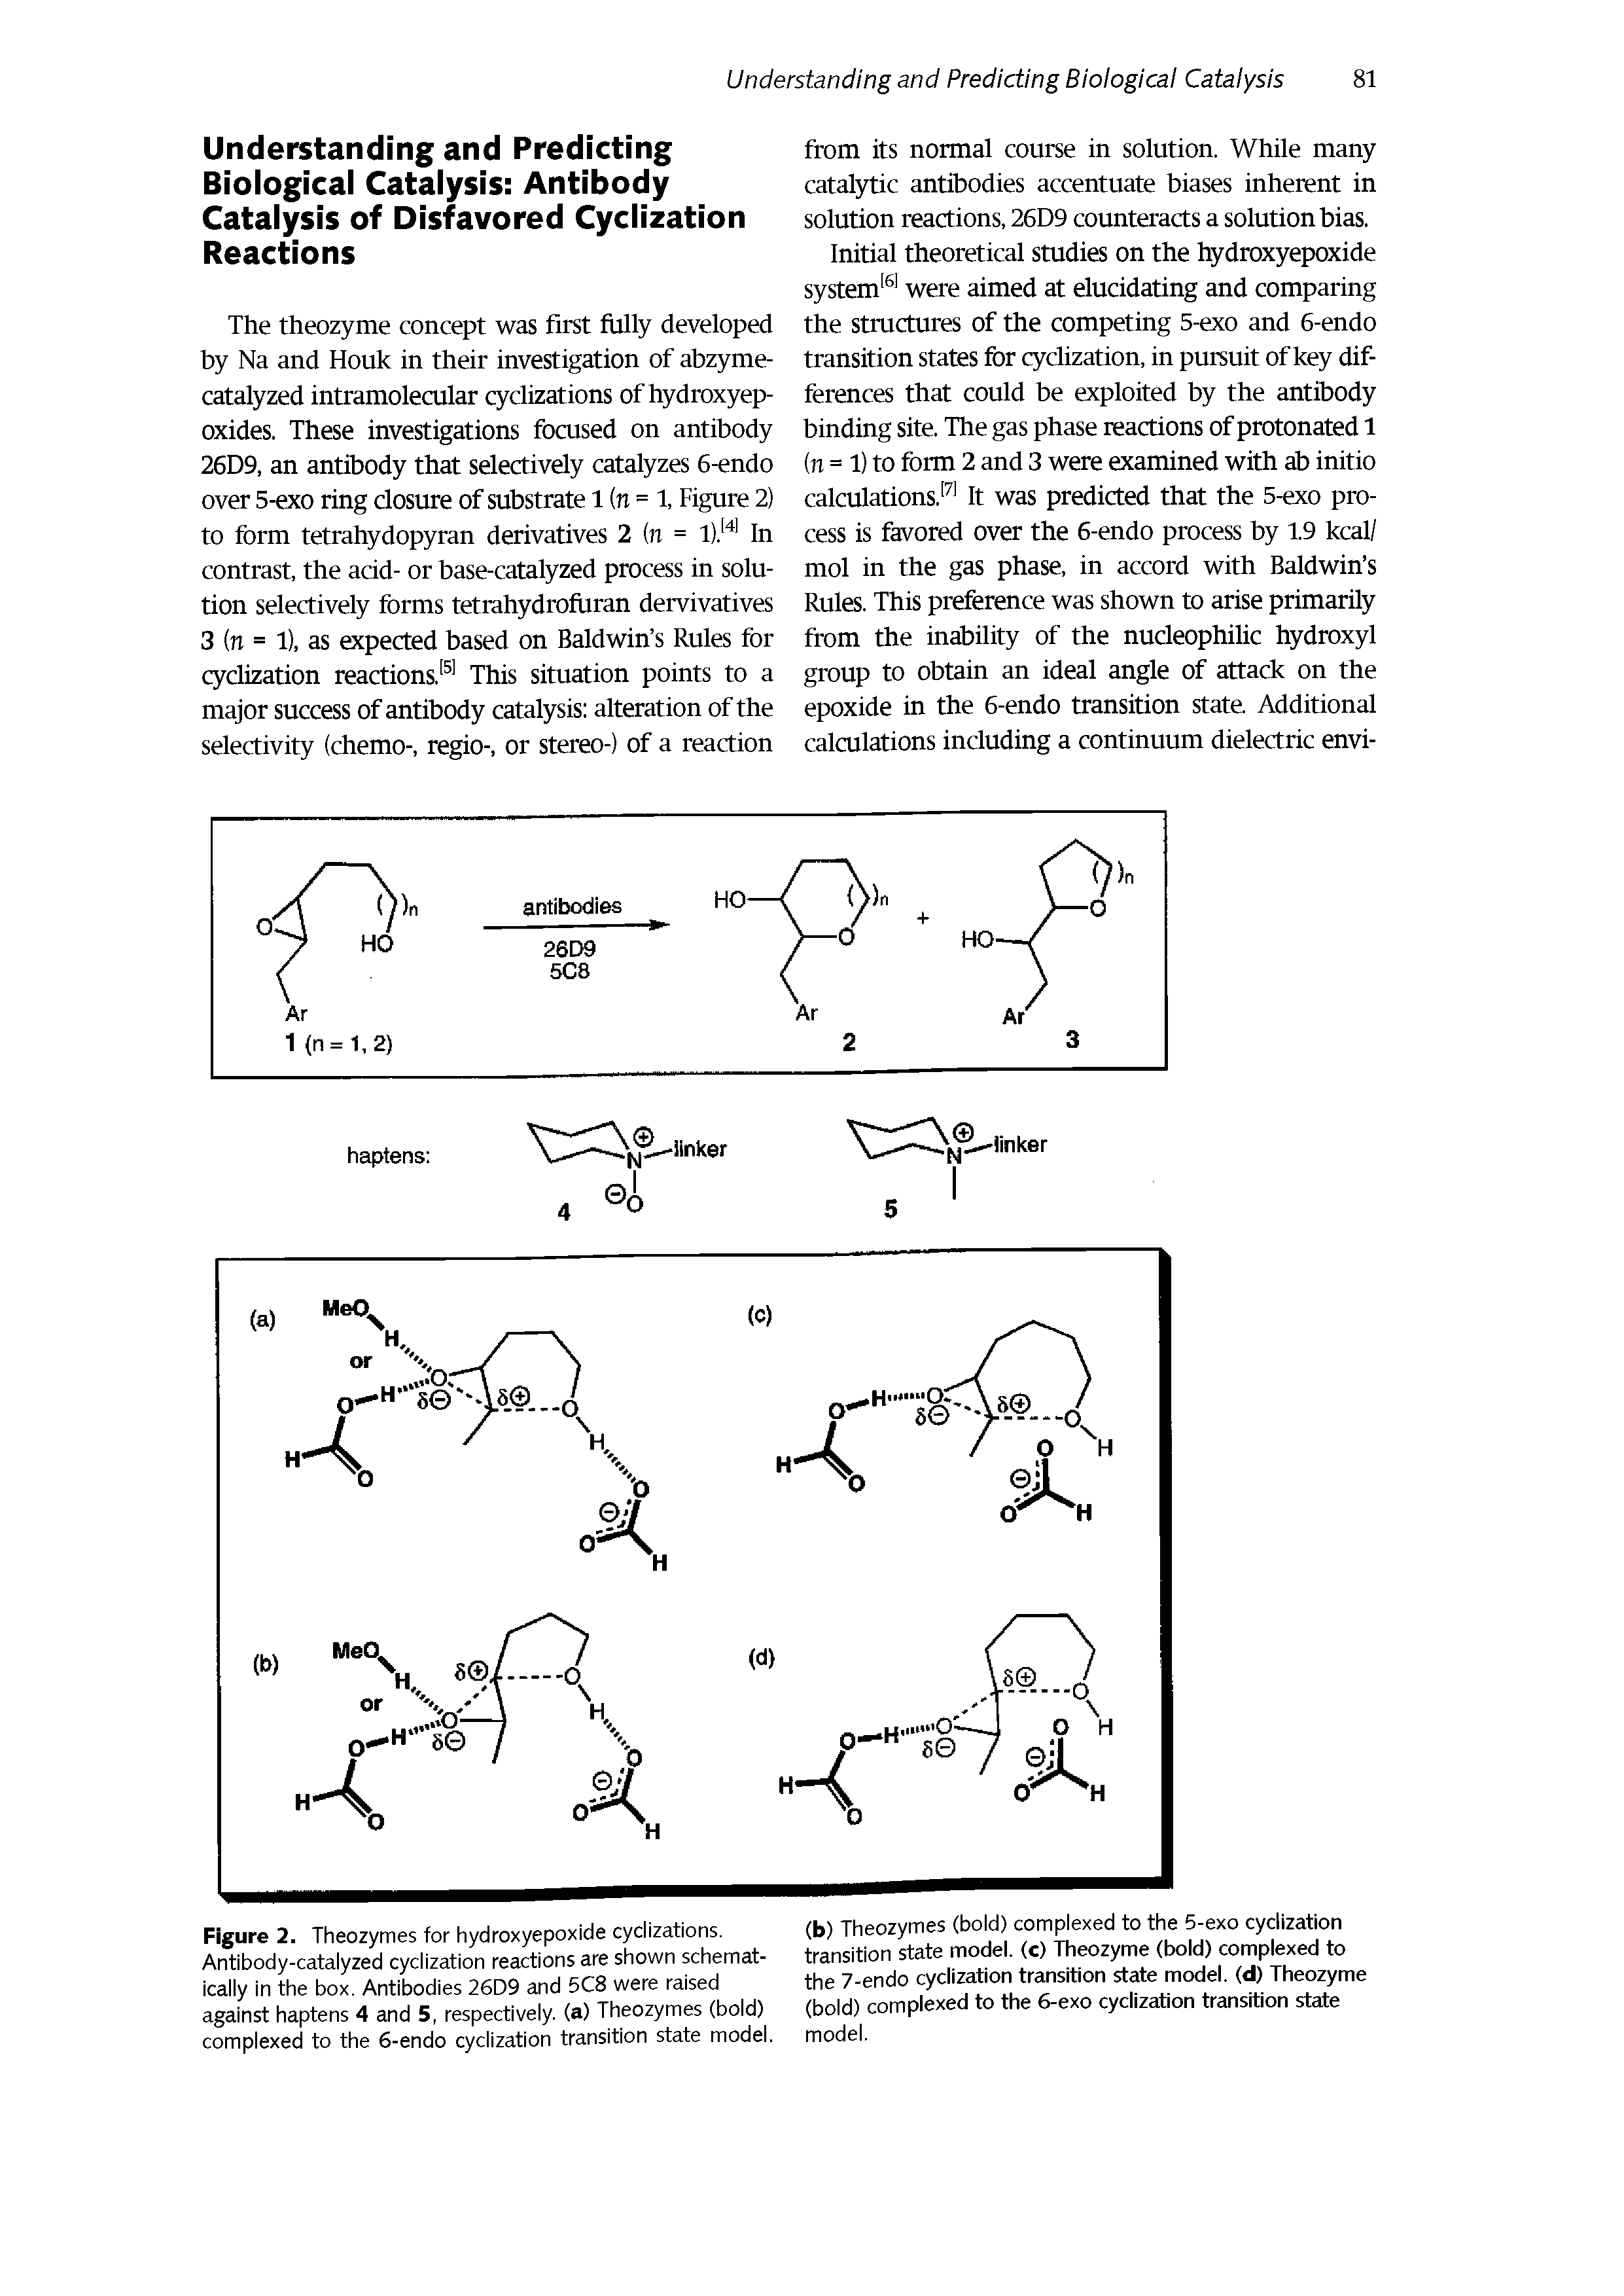 Figure 2. Theozymes for hydroxyepoxide cyclizations. Antibody-catalyzed cyclization reactions are shown schematically in the box. Antibodies 26D9 and 5C8 were raised against haptens 4 and 5, respectively, (a) Theozymes (bold) complexed to the 6-endo cyclization transition state model.